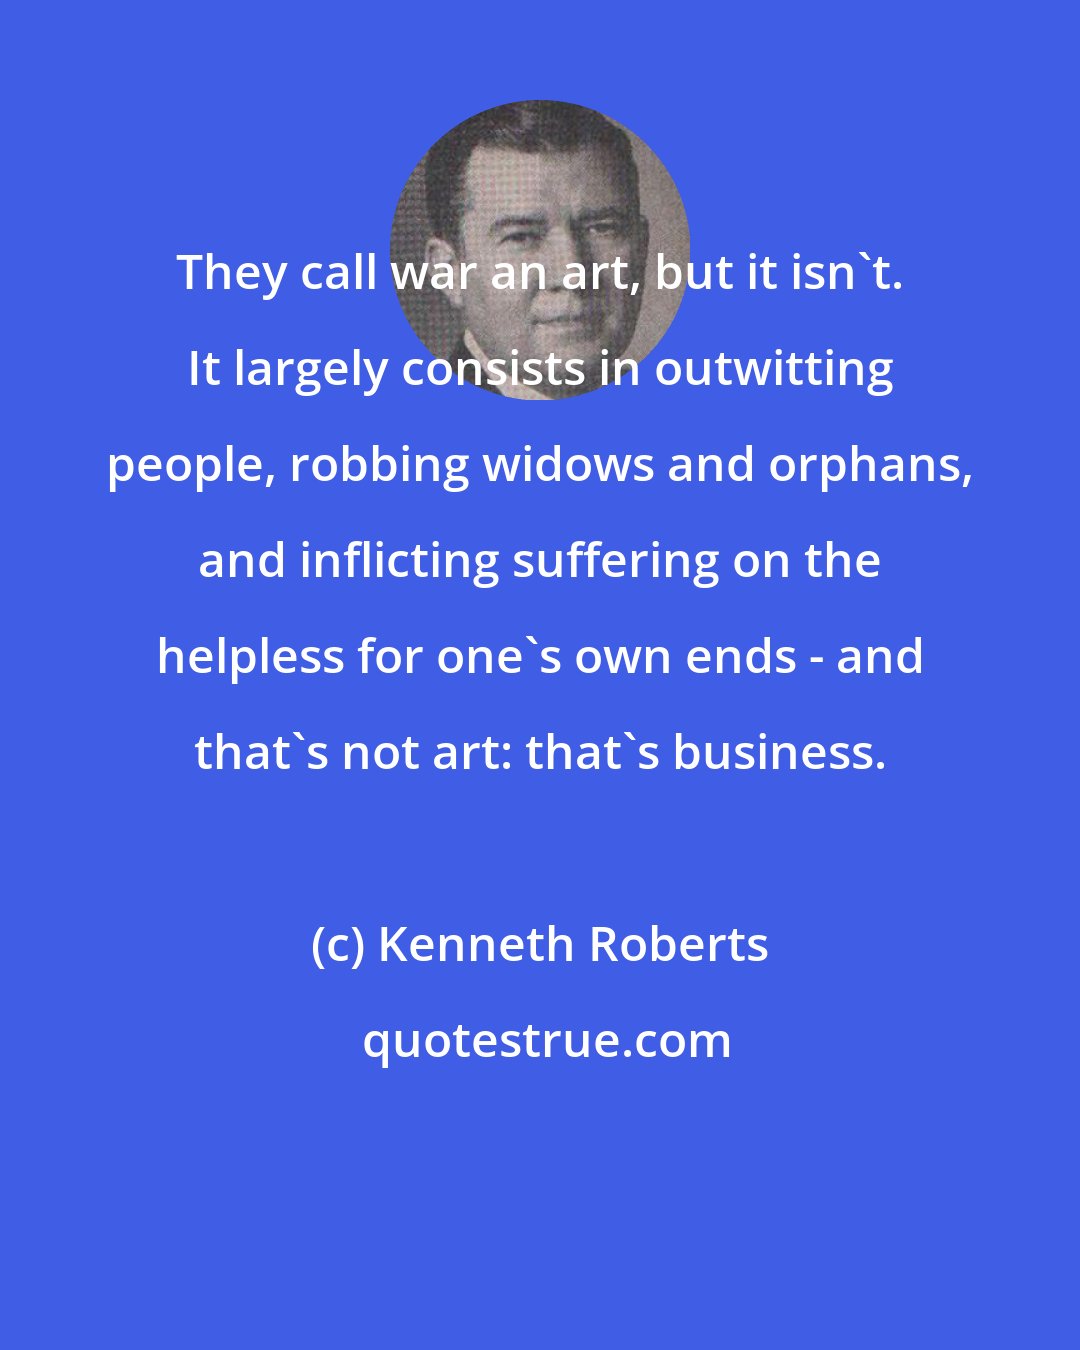 Kenneth Roberts: They call war an art, but it isn't. It largely consists in outwitting people, robbing widows and orphans, and inflicting suffering on the helpless for one's own ends - and that's not art: that's business.